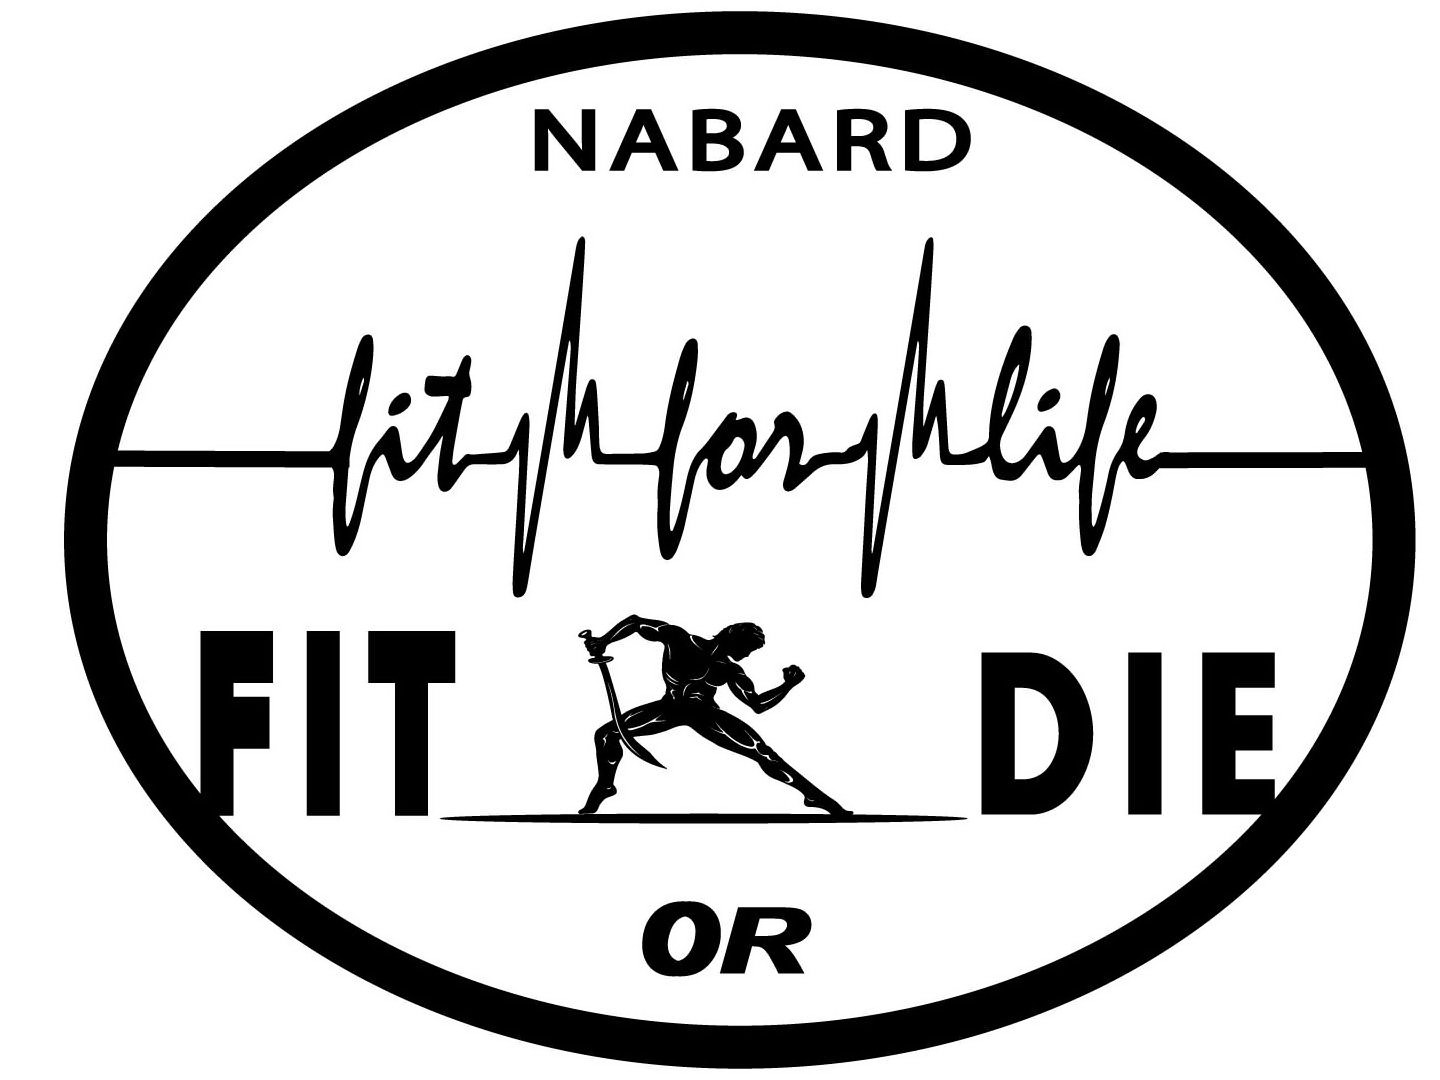  NABARD FIT FOR LIFE FIT OR DIE